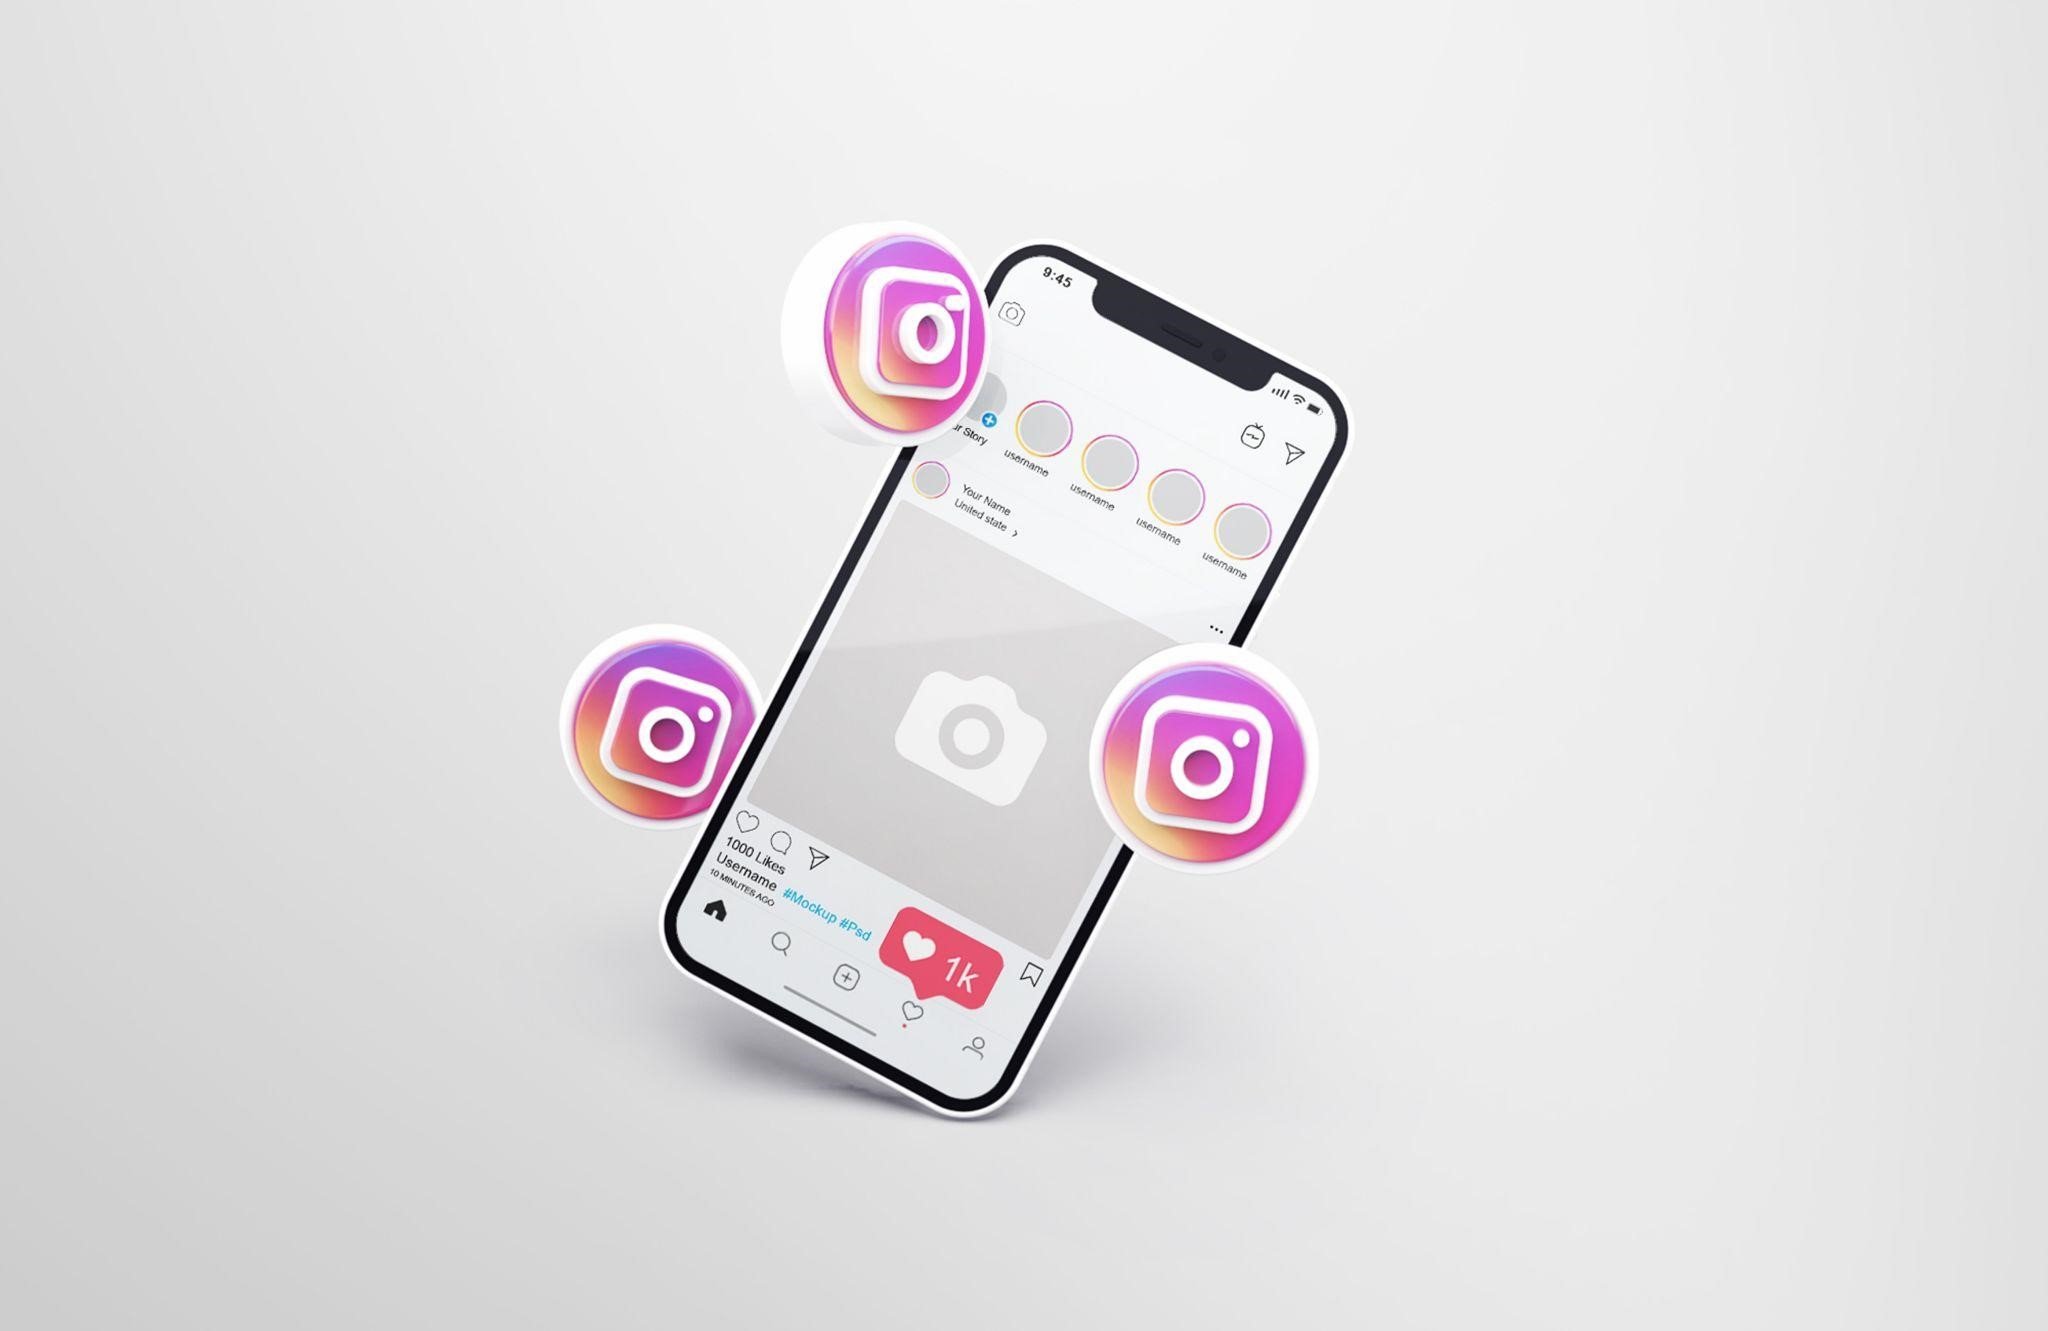 Buy Instagram Followers: Get Real & Instant IG Followers In 2022